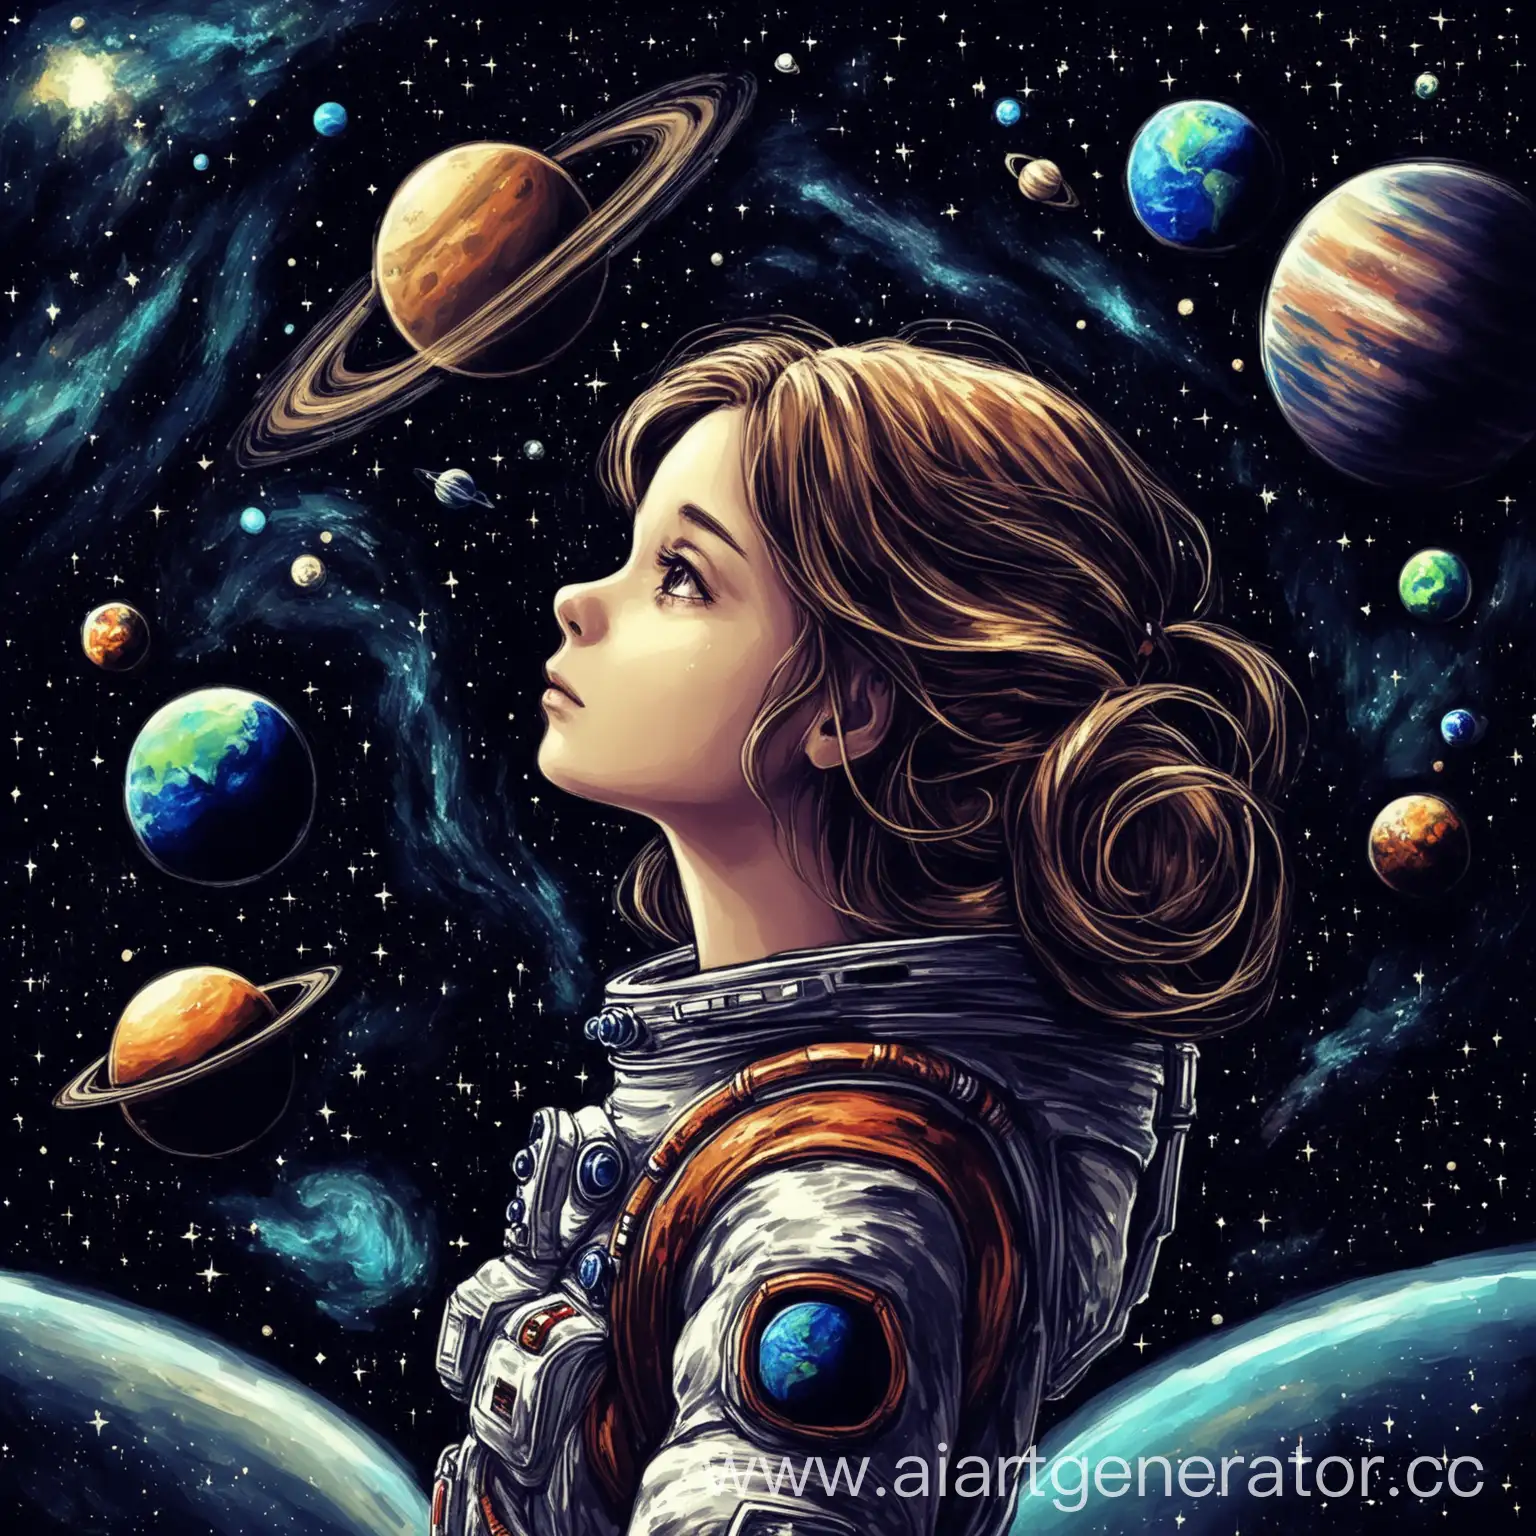 The girl is lost in her thoughts
a girl in space and between her planets with her thoughts

